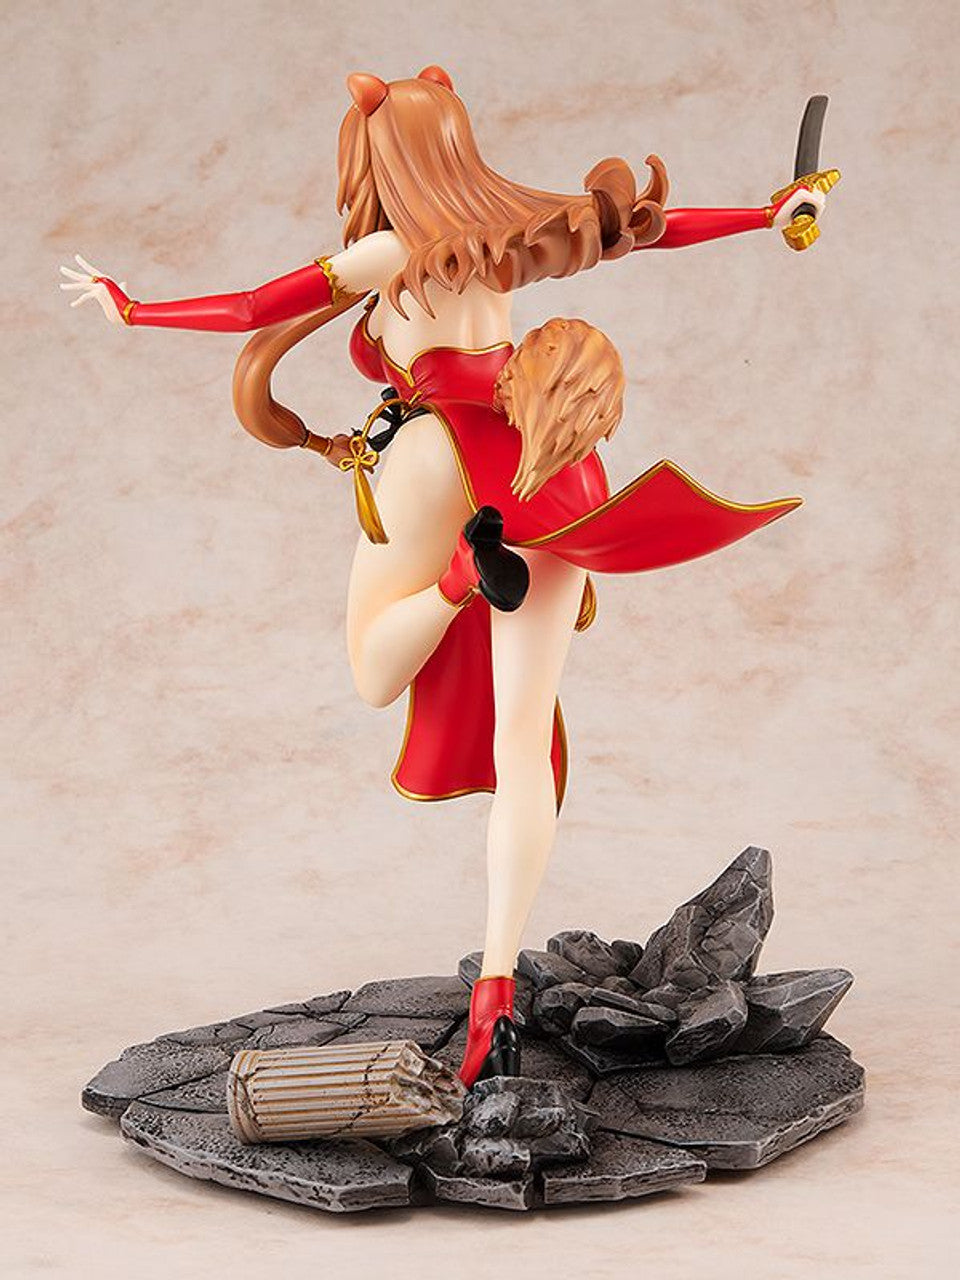 The Rising Of The Shield Hero Season 2 &quot;Raphtalia&quot; (Red Dress Style Ver. )-Kadokawa-Ace Cards &amp; Collectibles